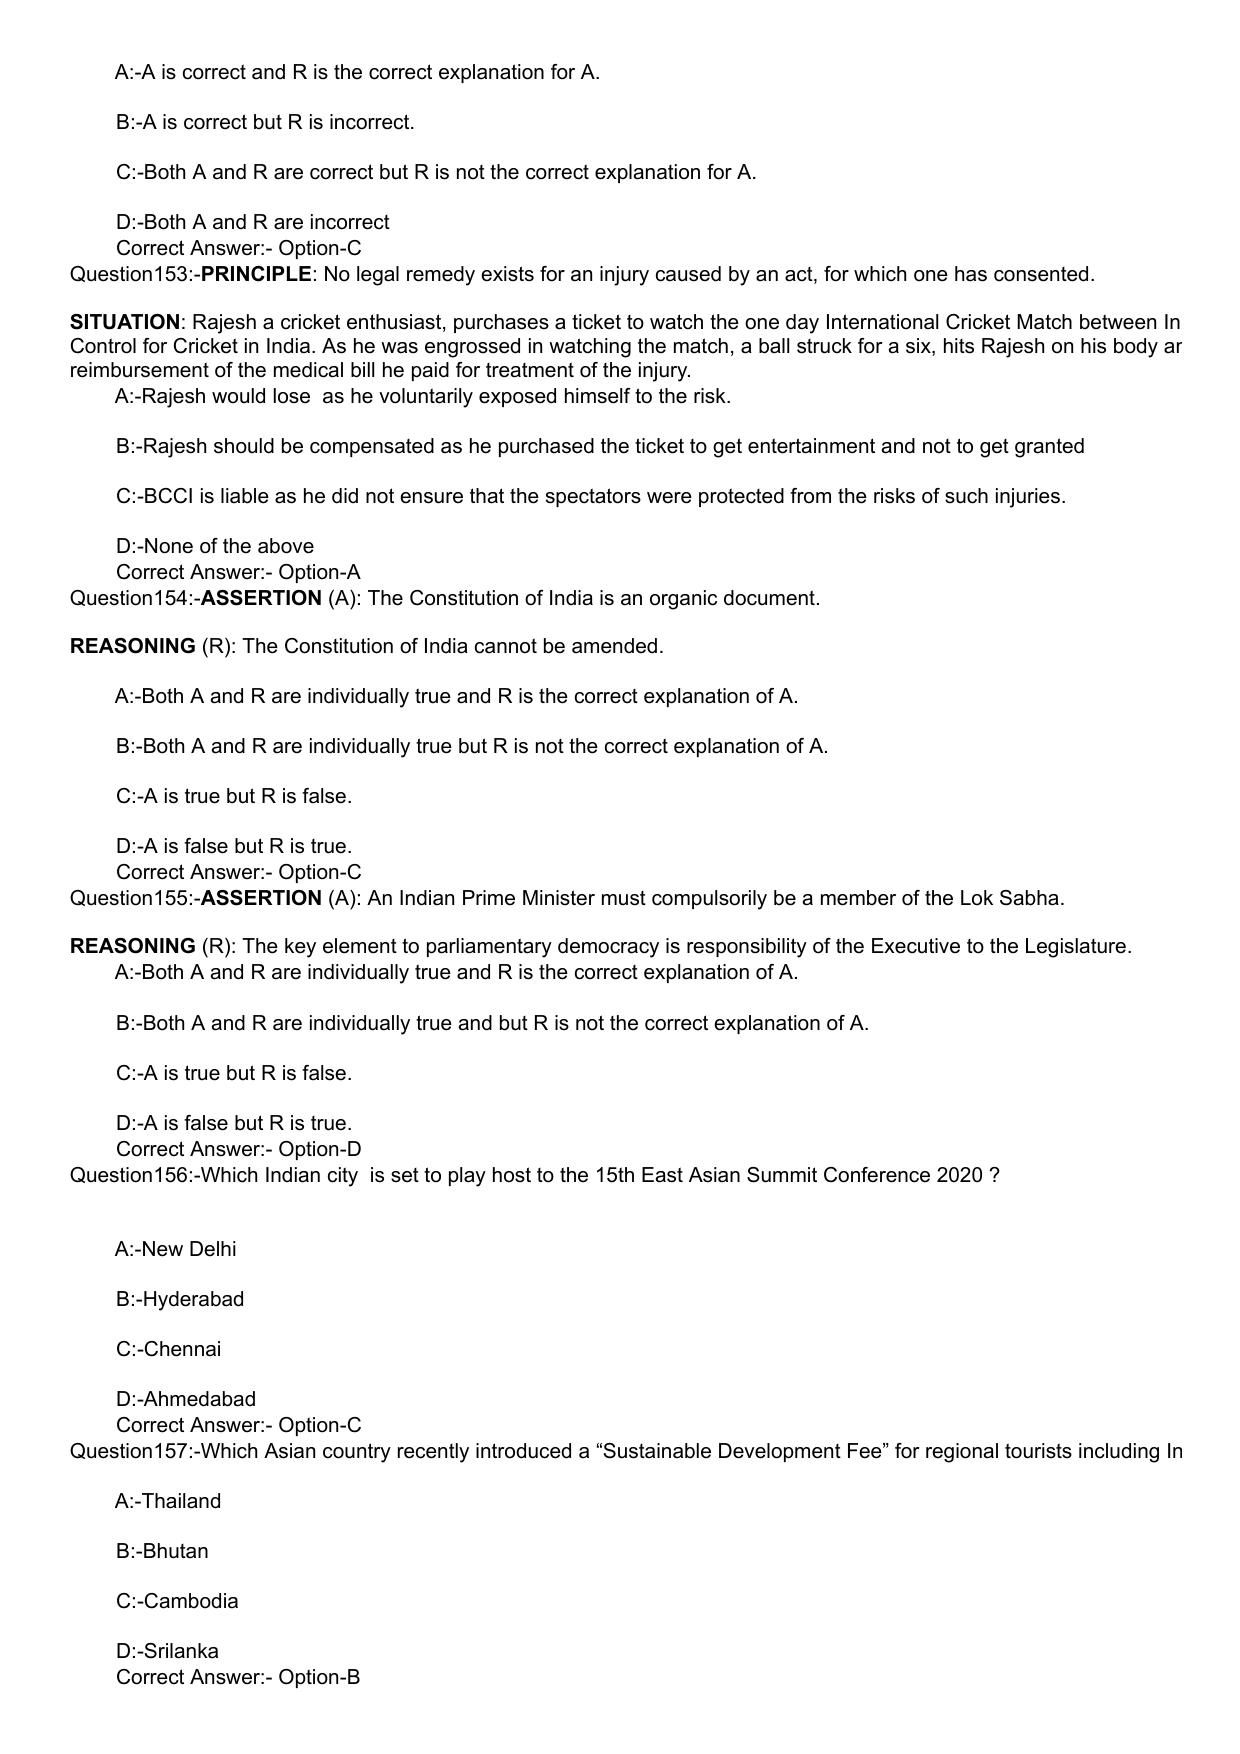 KLEE 5 Year LLB Exam 2020 Question Paper - Page 27